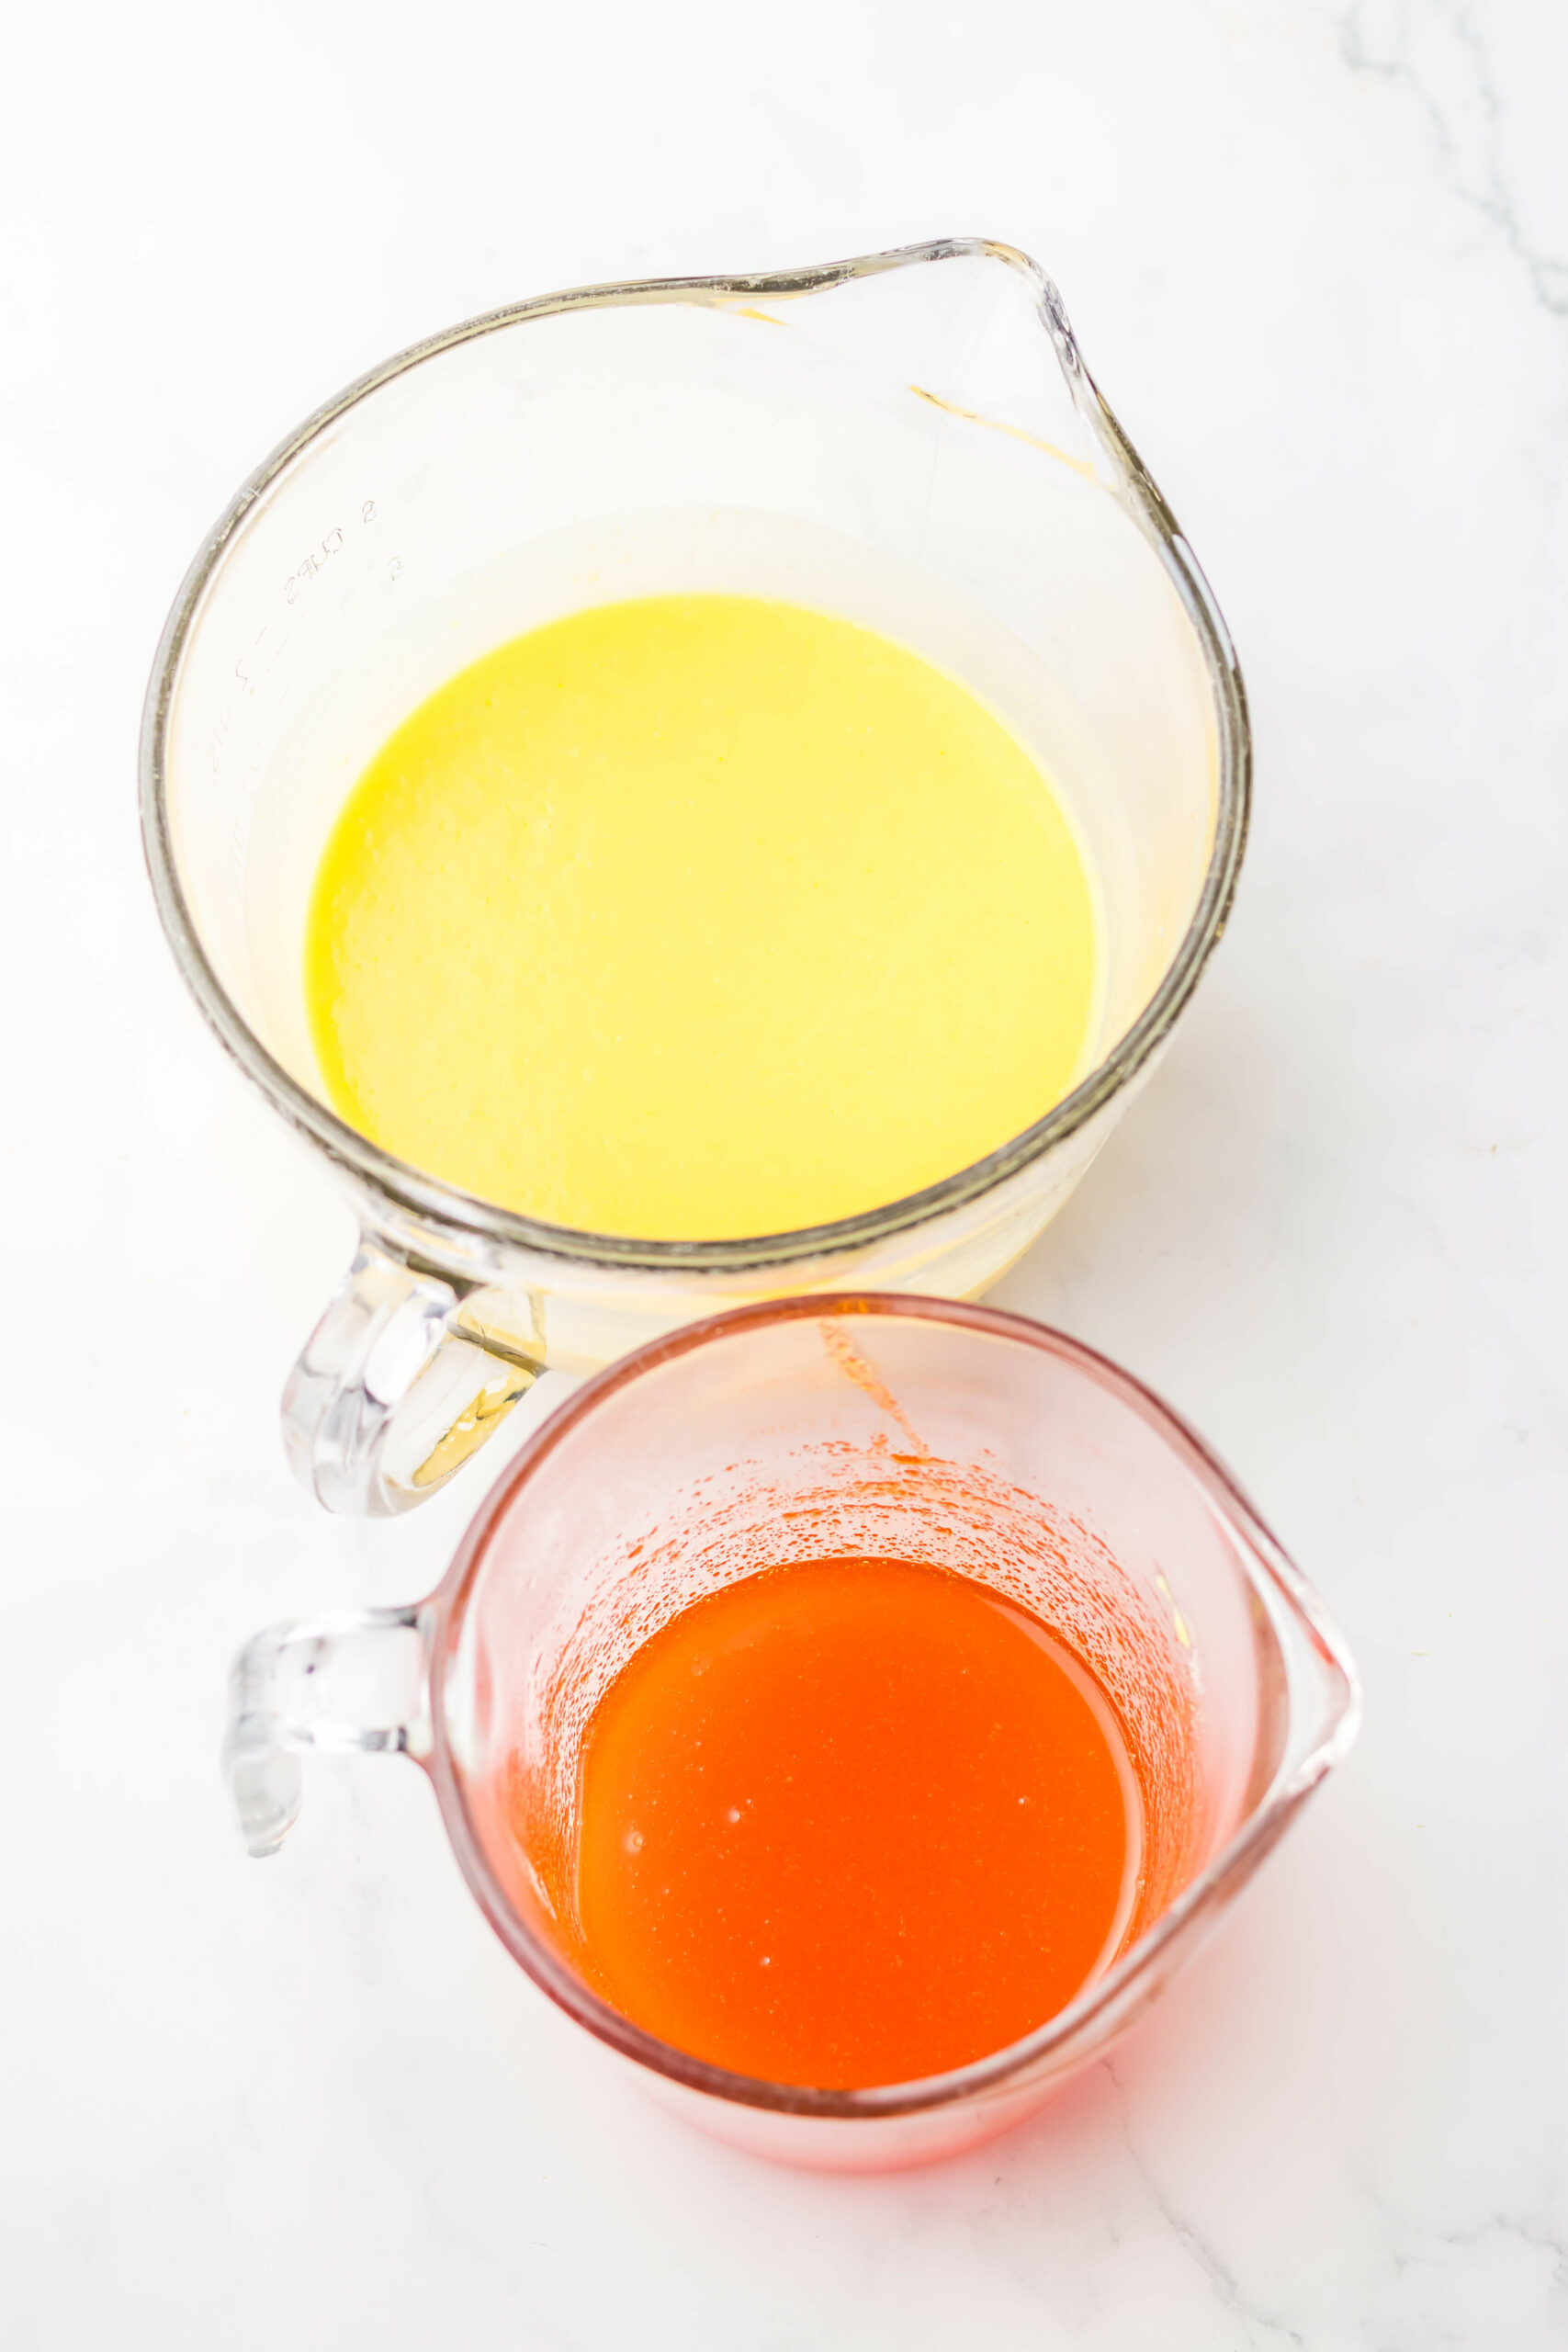 Two measuring jugs with liquid ingredients on a white surface — one contains yellow liquid, possibly melted butter, and the other contains red liquid for making an orange creamsicle cake.